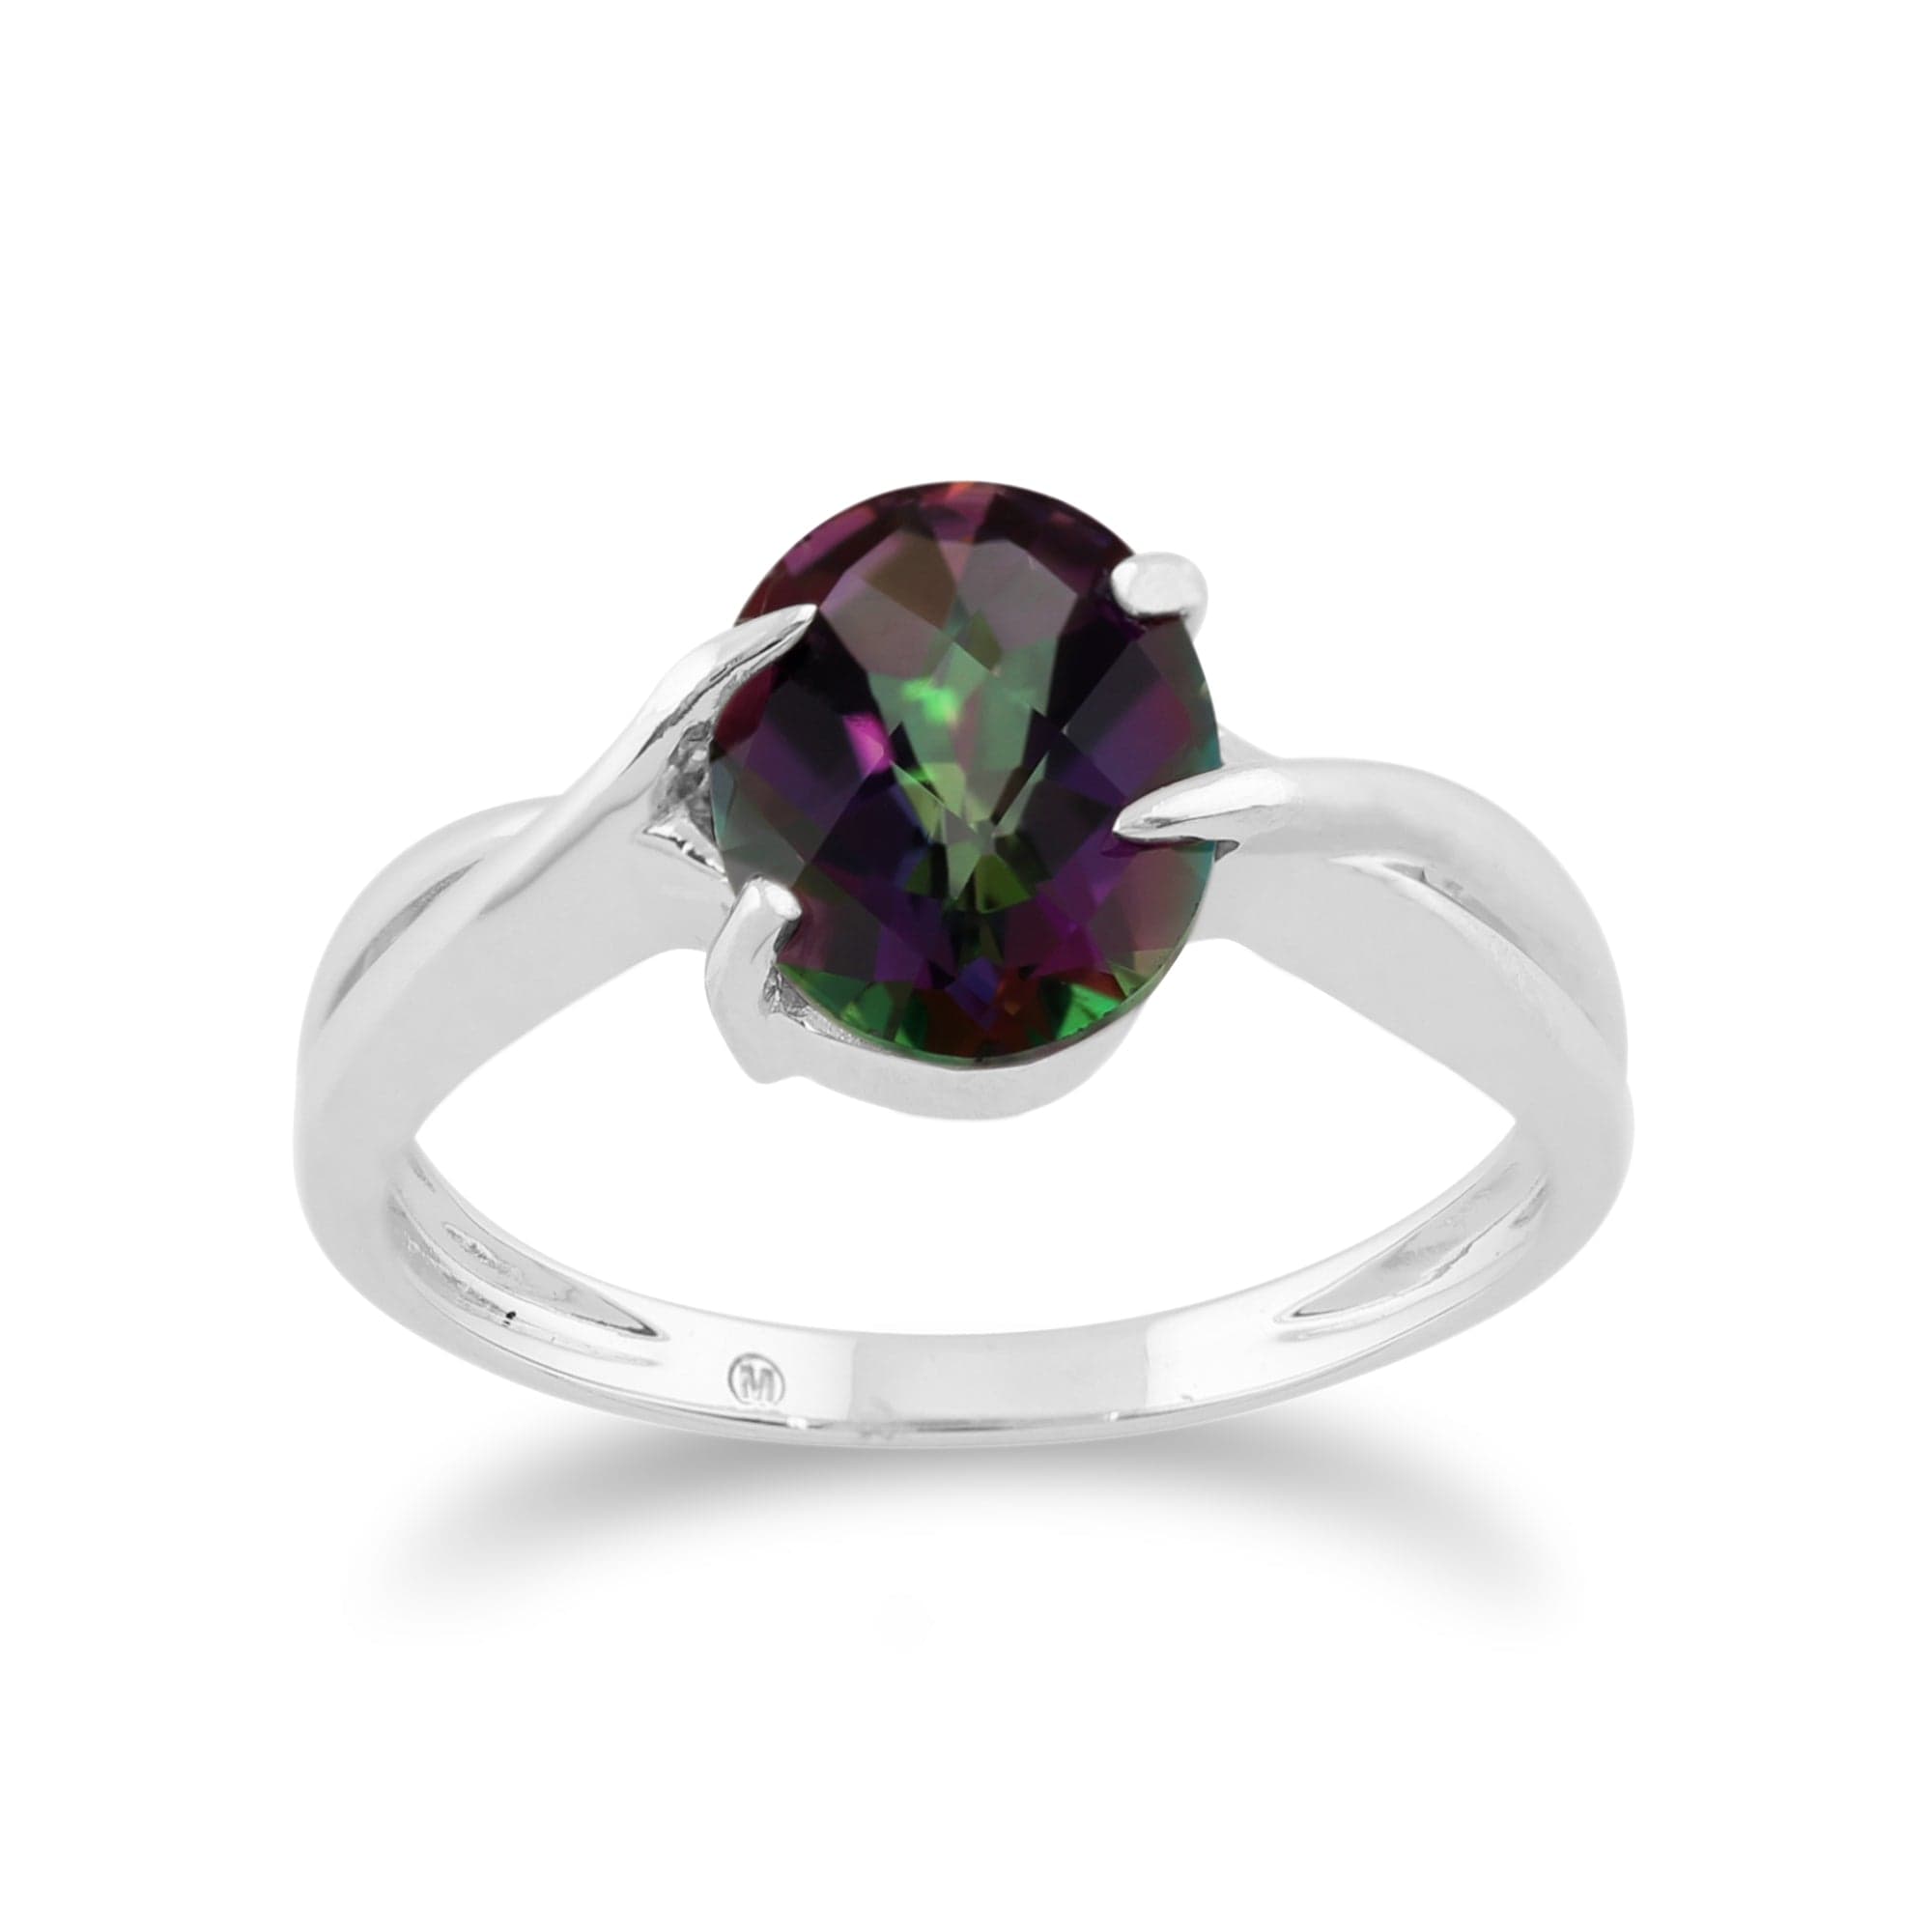 9ct White Gold 2.00ct Oval Cut Mystic Topaz Classic Single Stone Ring Image 1